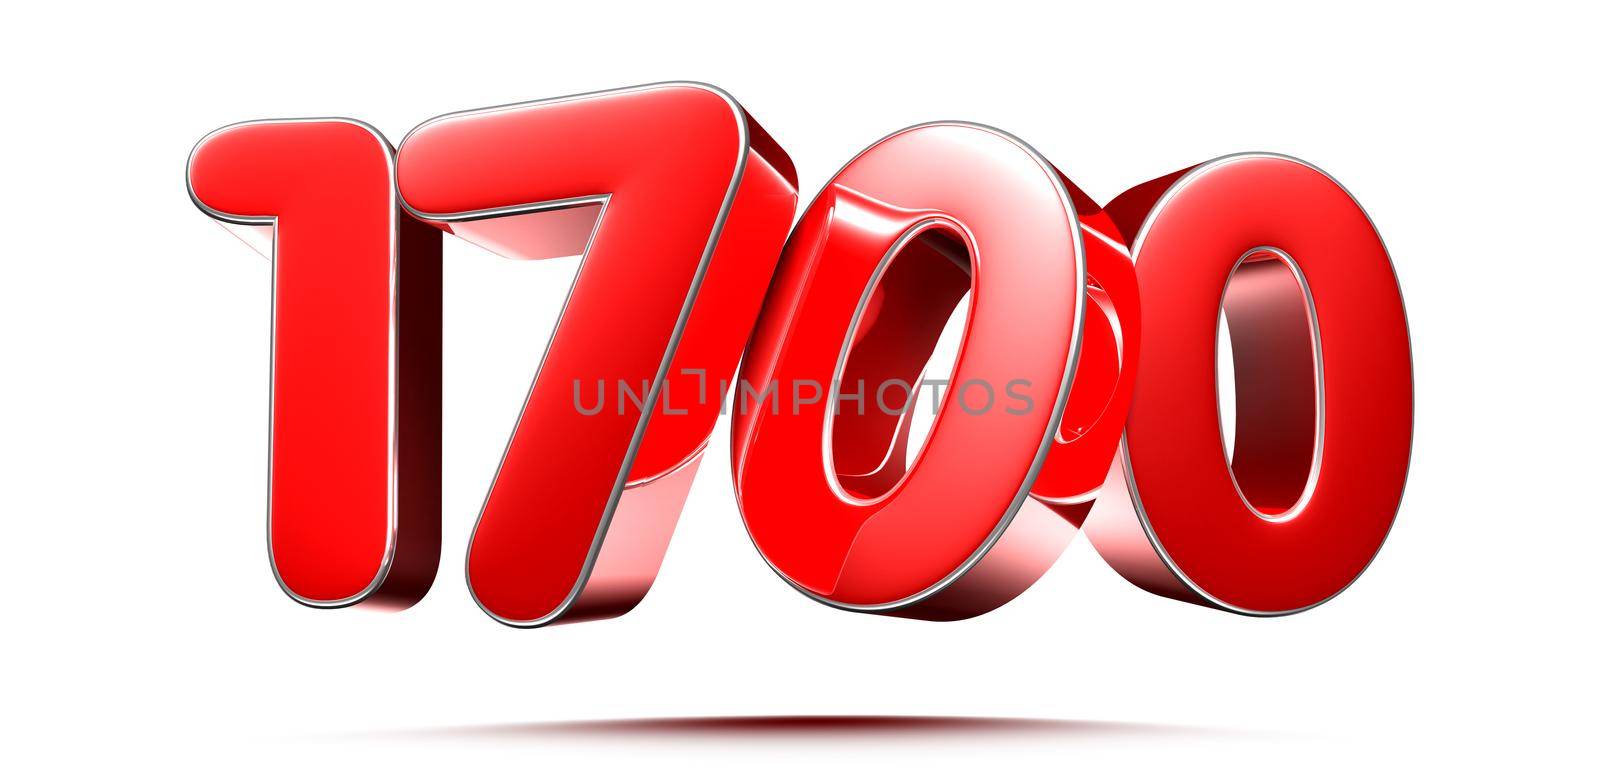 Rounded red numbers 1700 on white background 3D illustration with clipping path